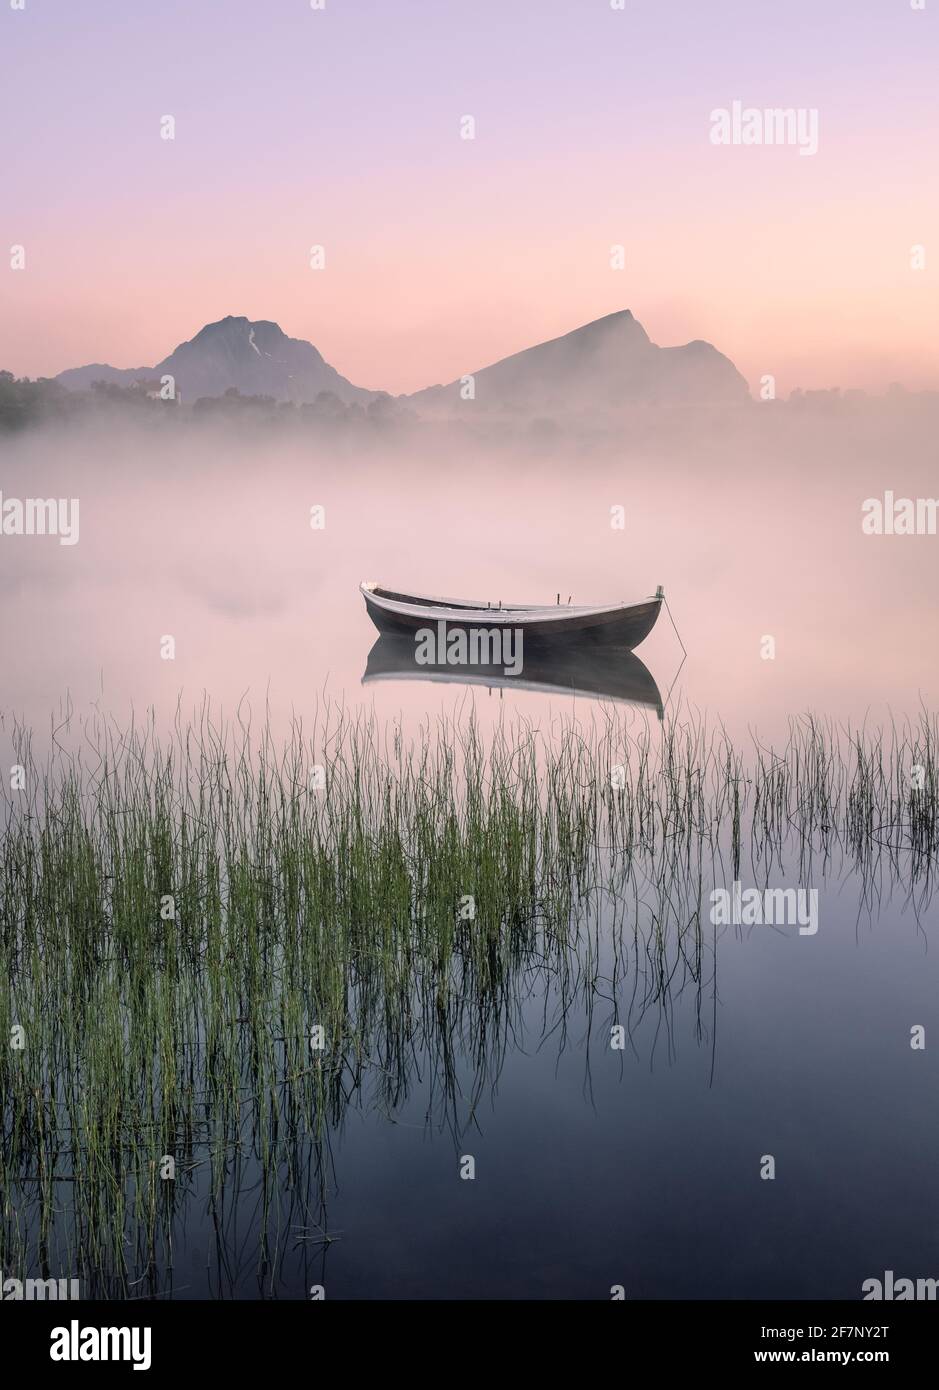 Very peaceful summer night with wooden boat and fog in Lofoten, Norway Stock Photo